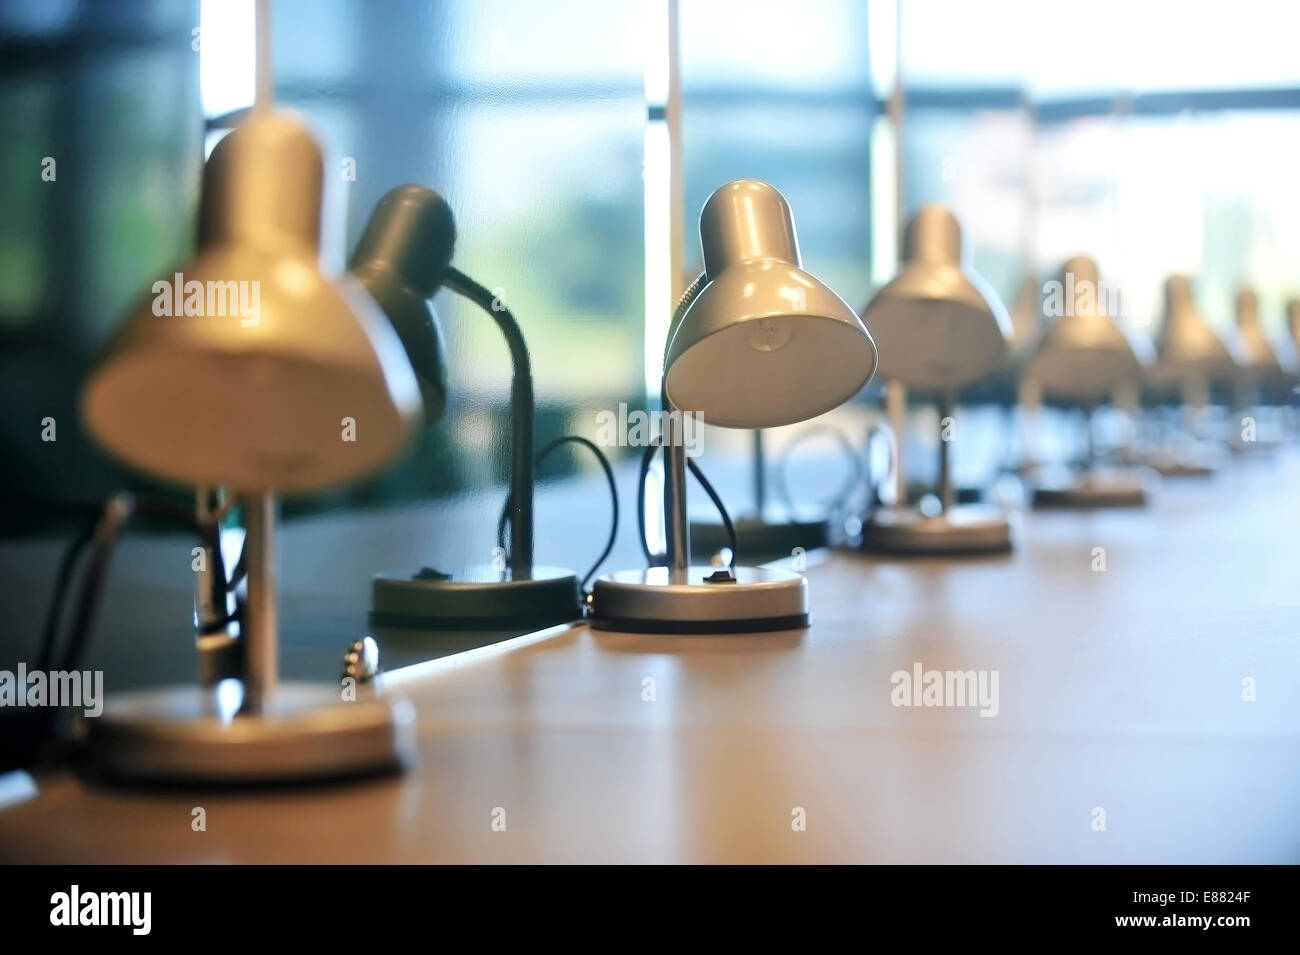 Several reading library lamps in a row on a desk Stock Photo